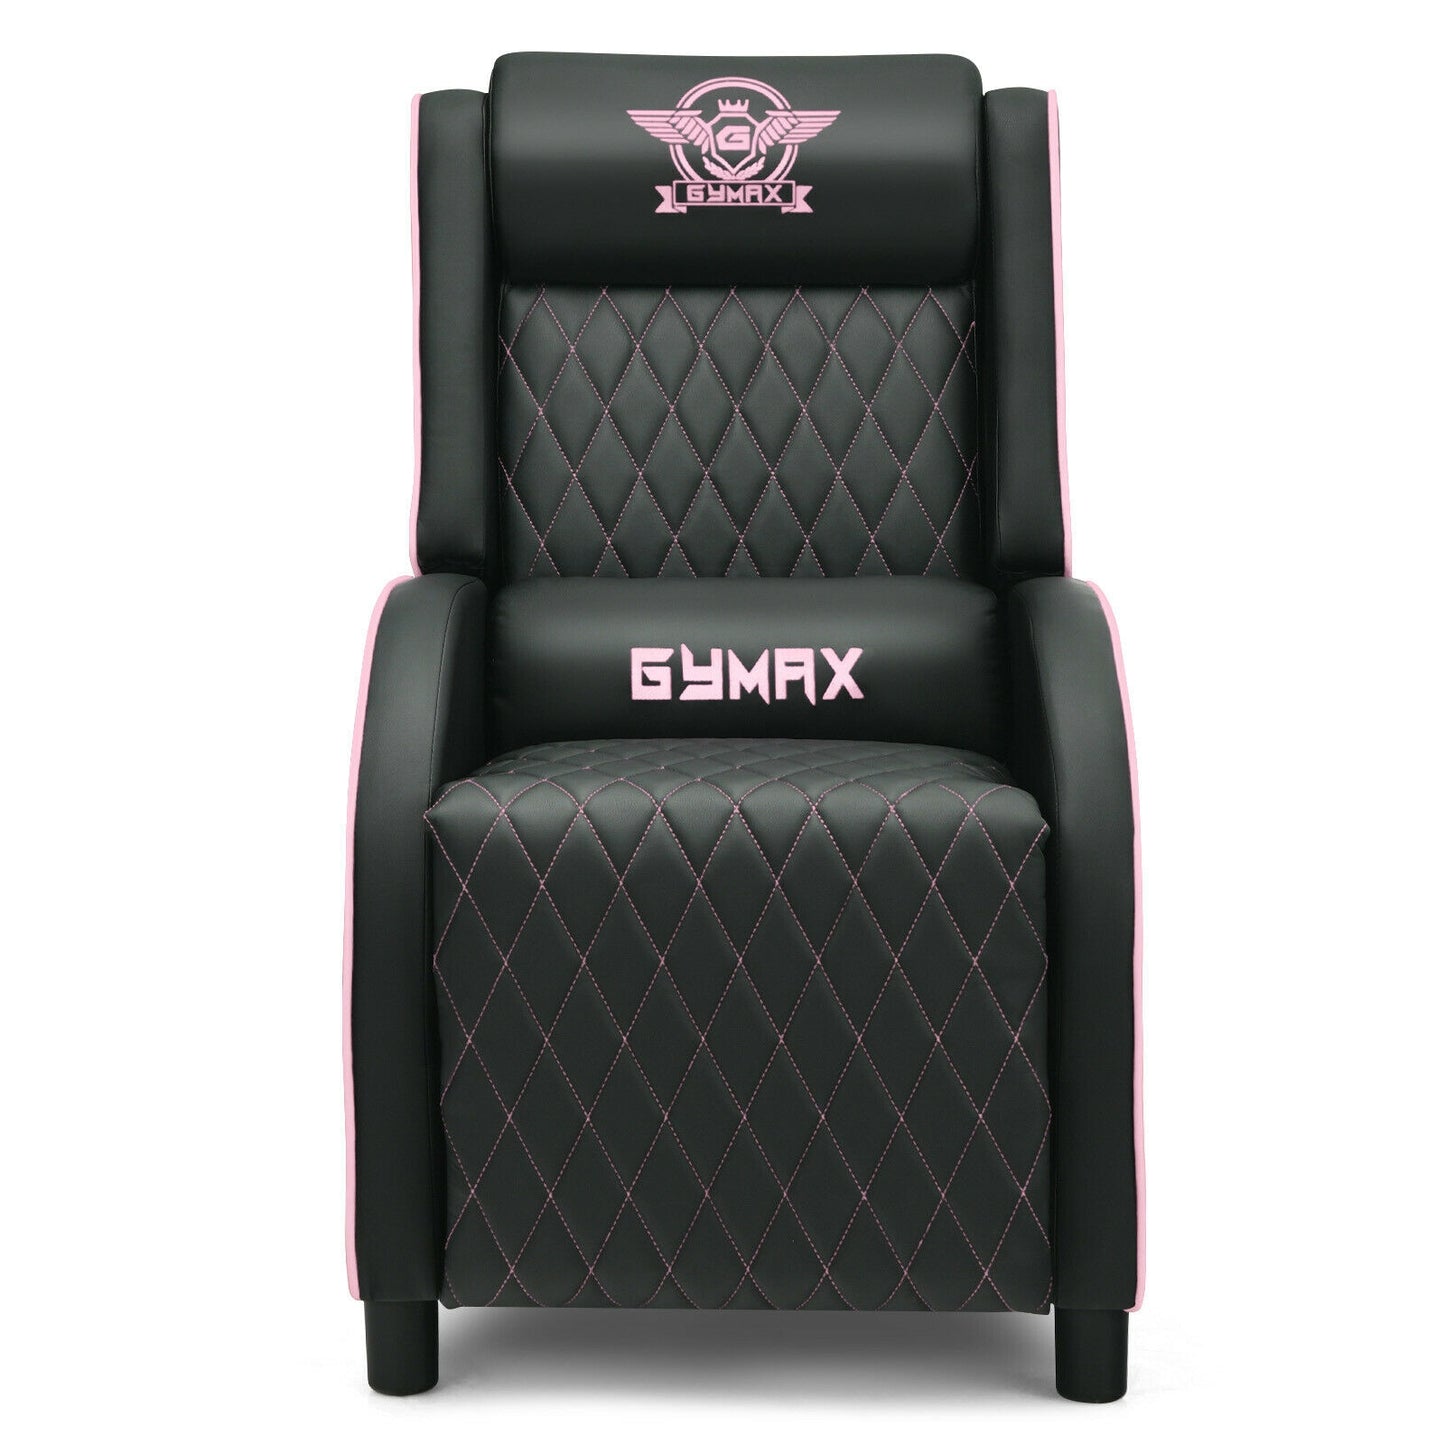 Massage Gaming Recliner Chair with Headrest and Adjustable Backrest for Home Theater-Pink